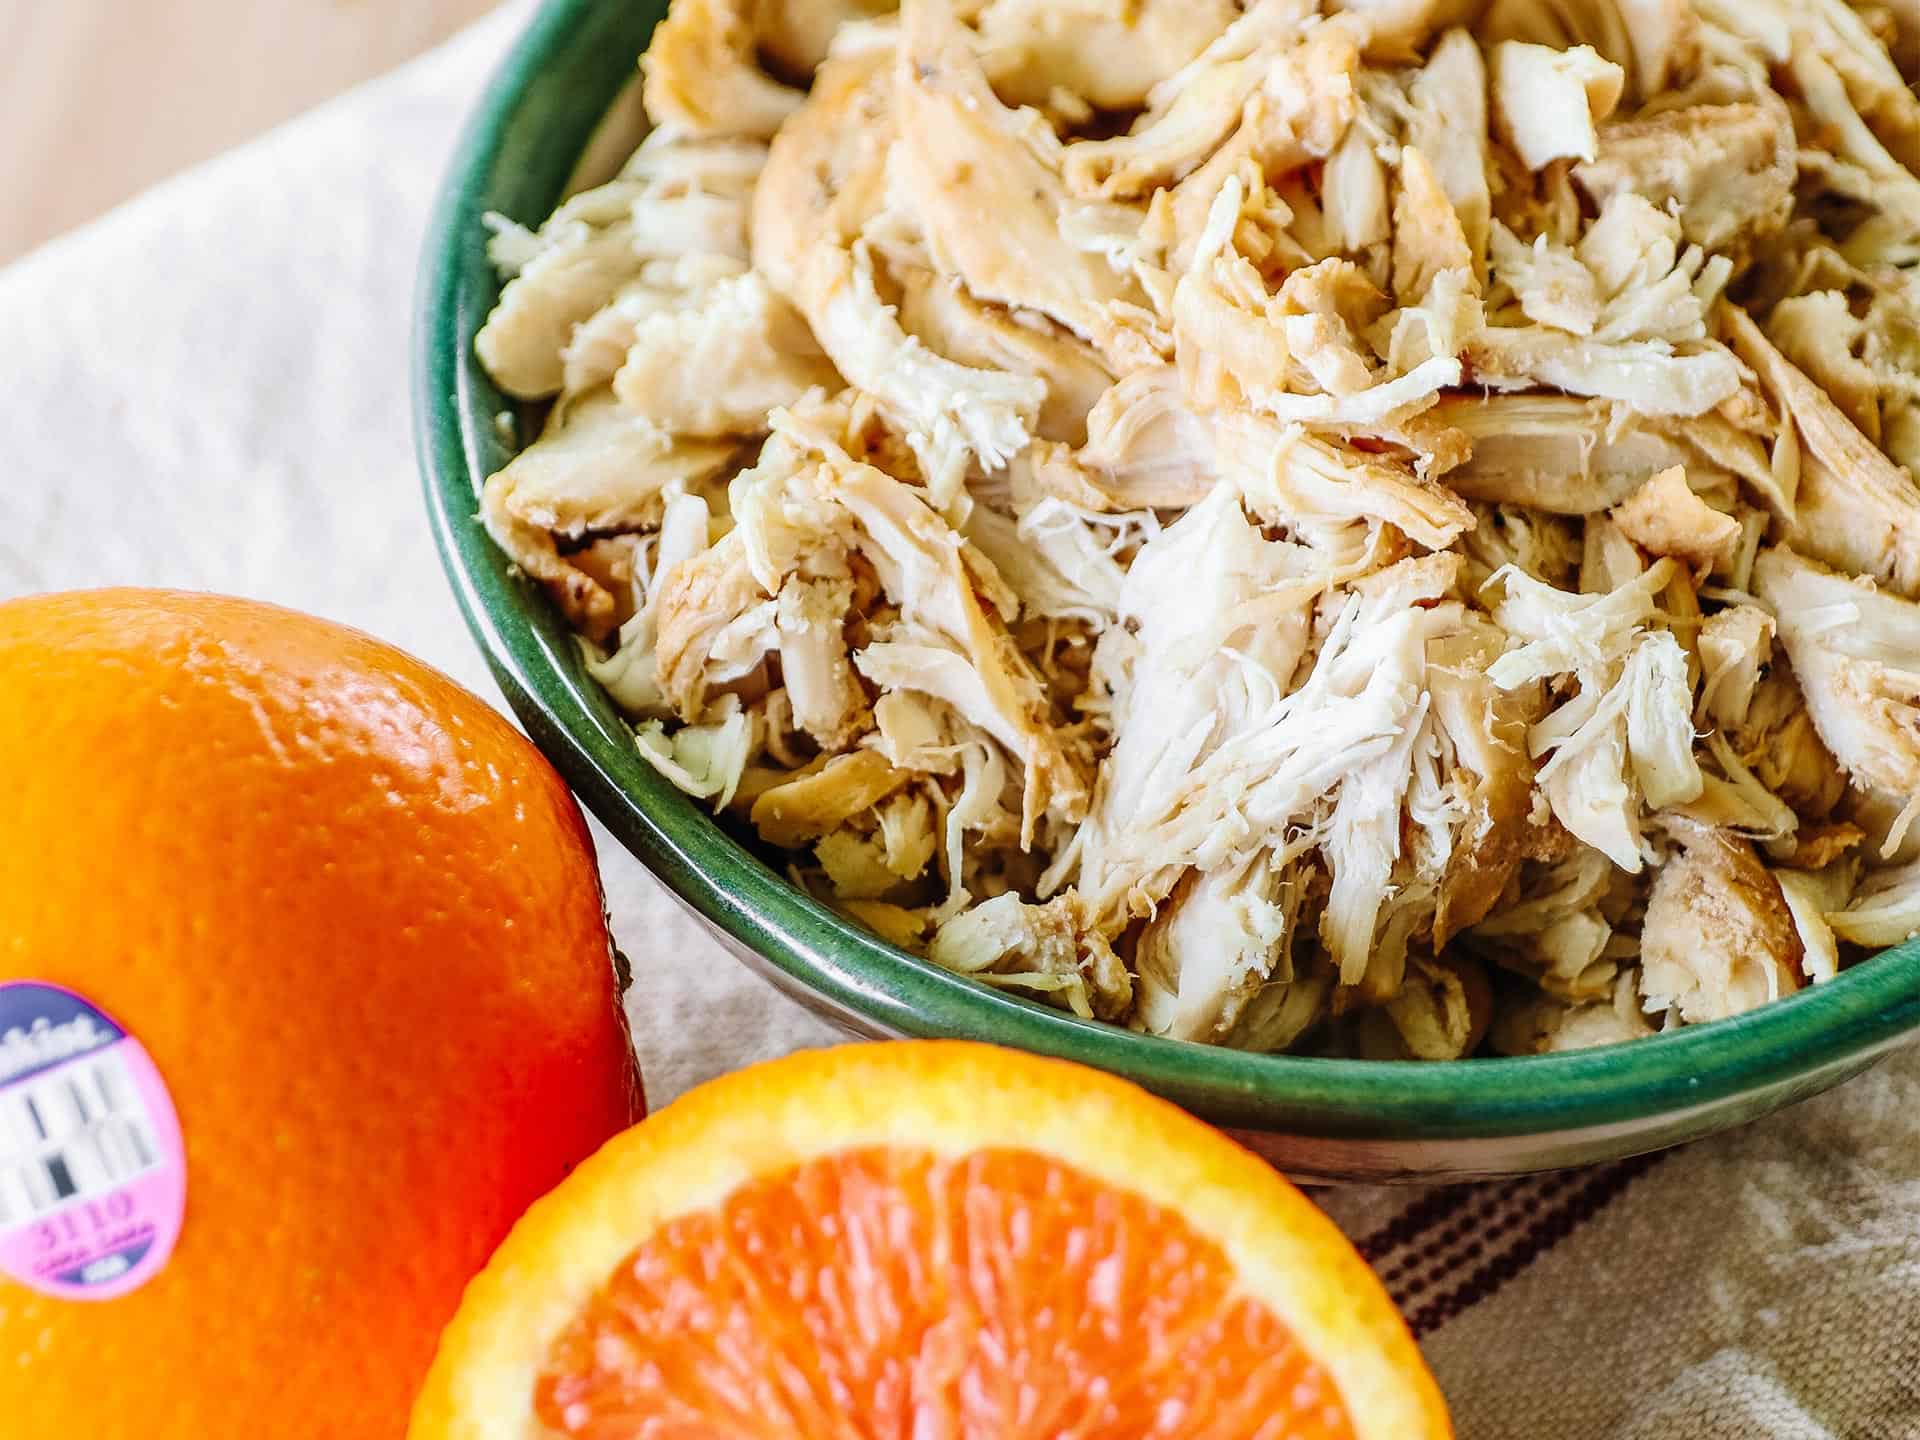 The Easiest Crockpot Chicken Made With Sunkist Oranges